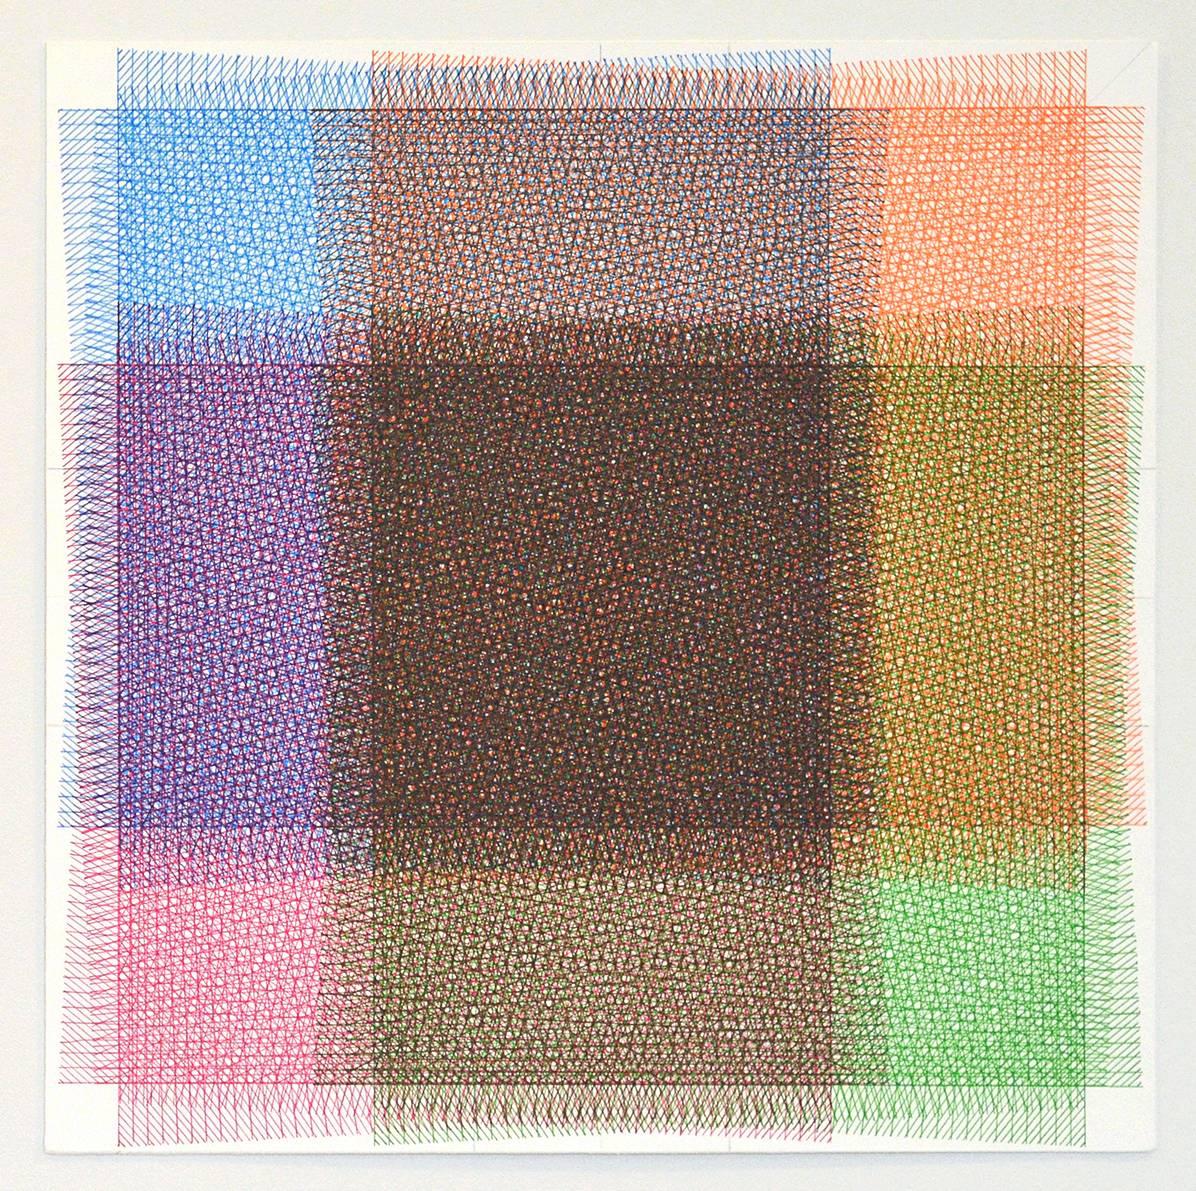 Sara Eichner, 32 Layers of Rectangles, 2016, Ink, Rag Paper, Pen